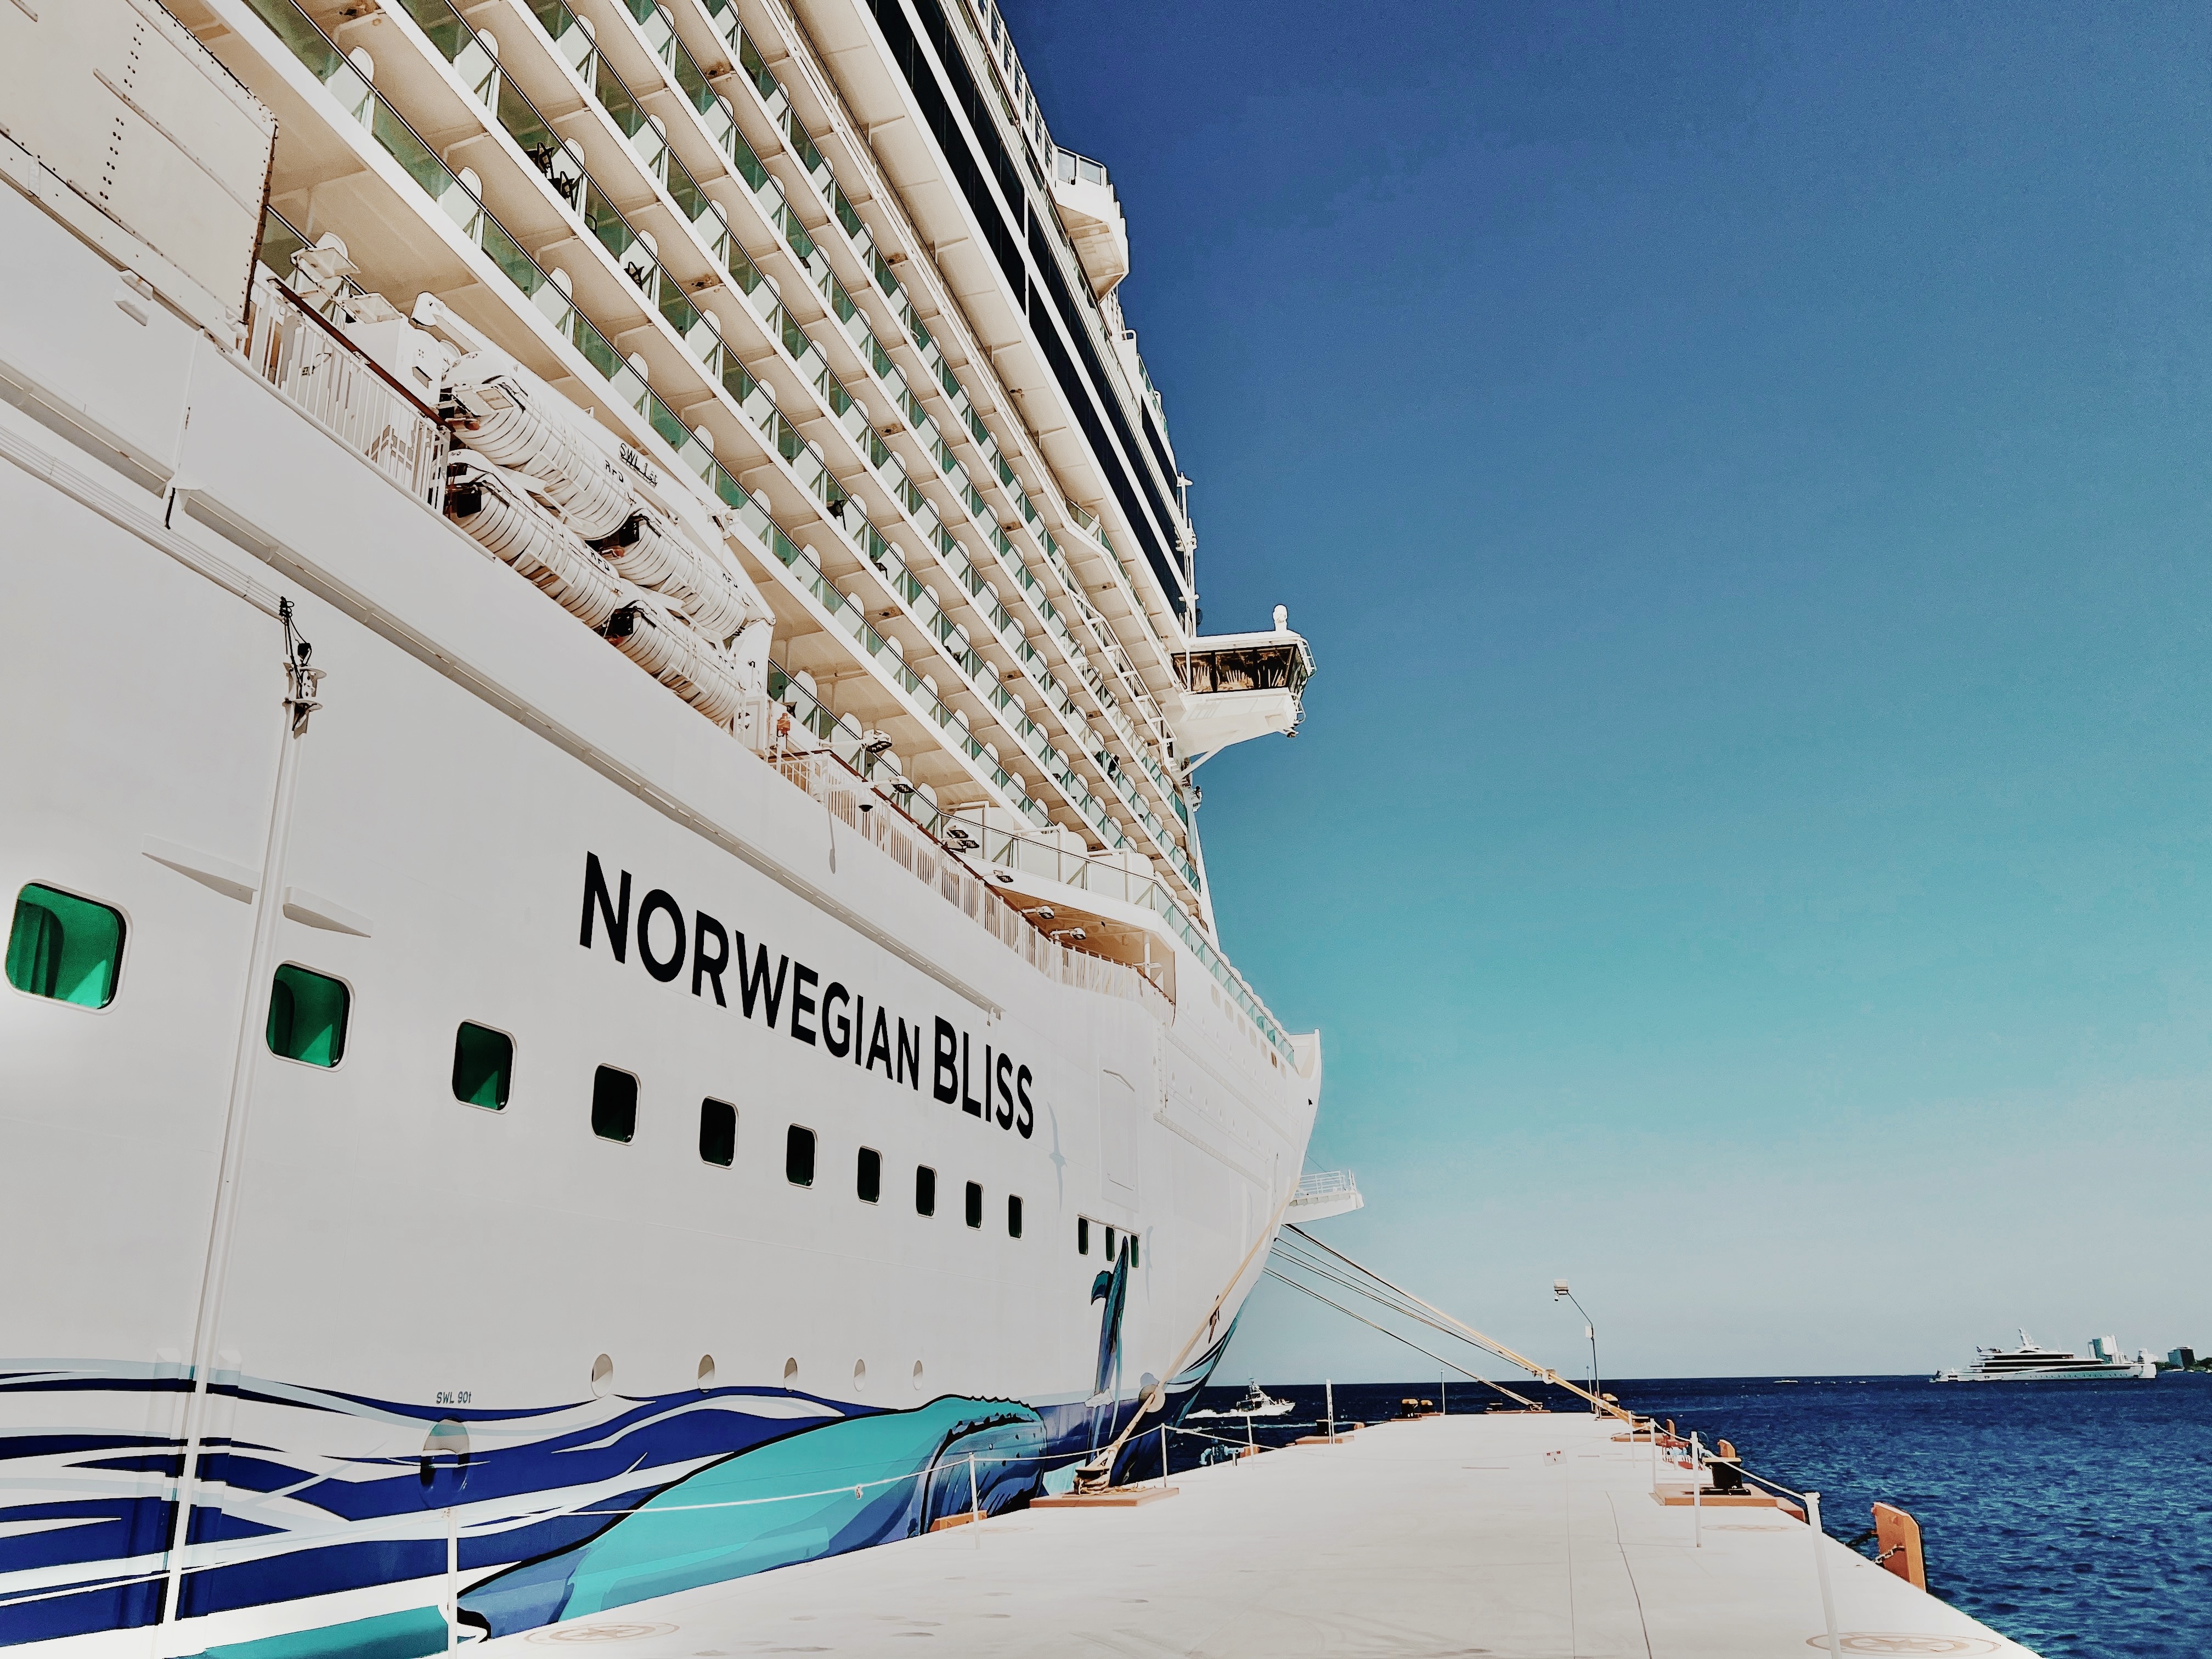 10 Things I loved and hated about Norwegian Bliss cruise ship Cruise.Blog